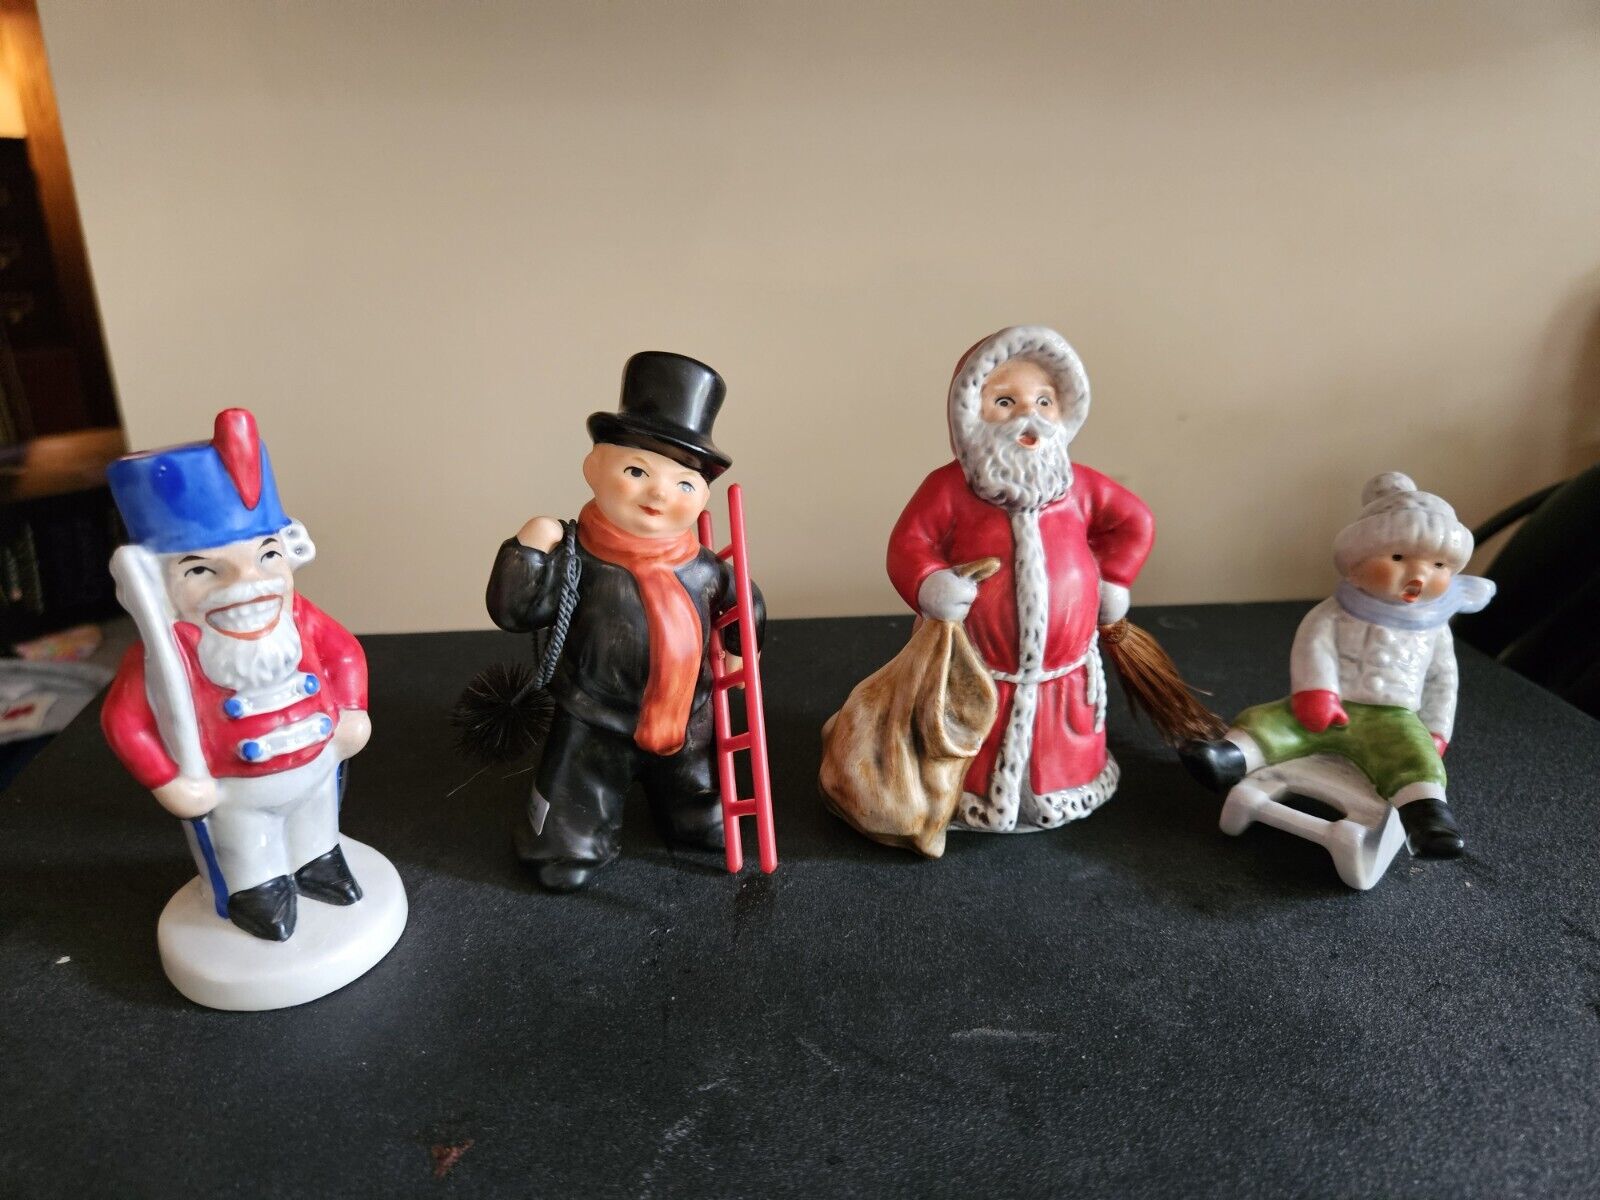 Vintage Goebel Christmas Figurines Small 4 Piece Set Excellent Condition. 